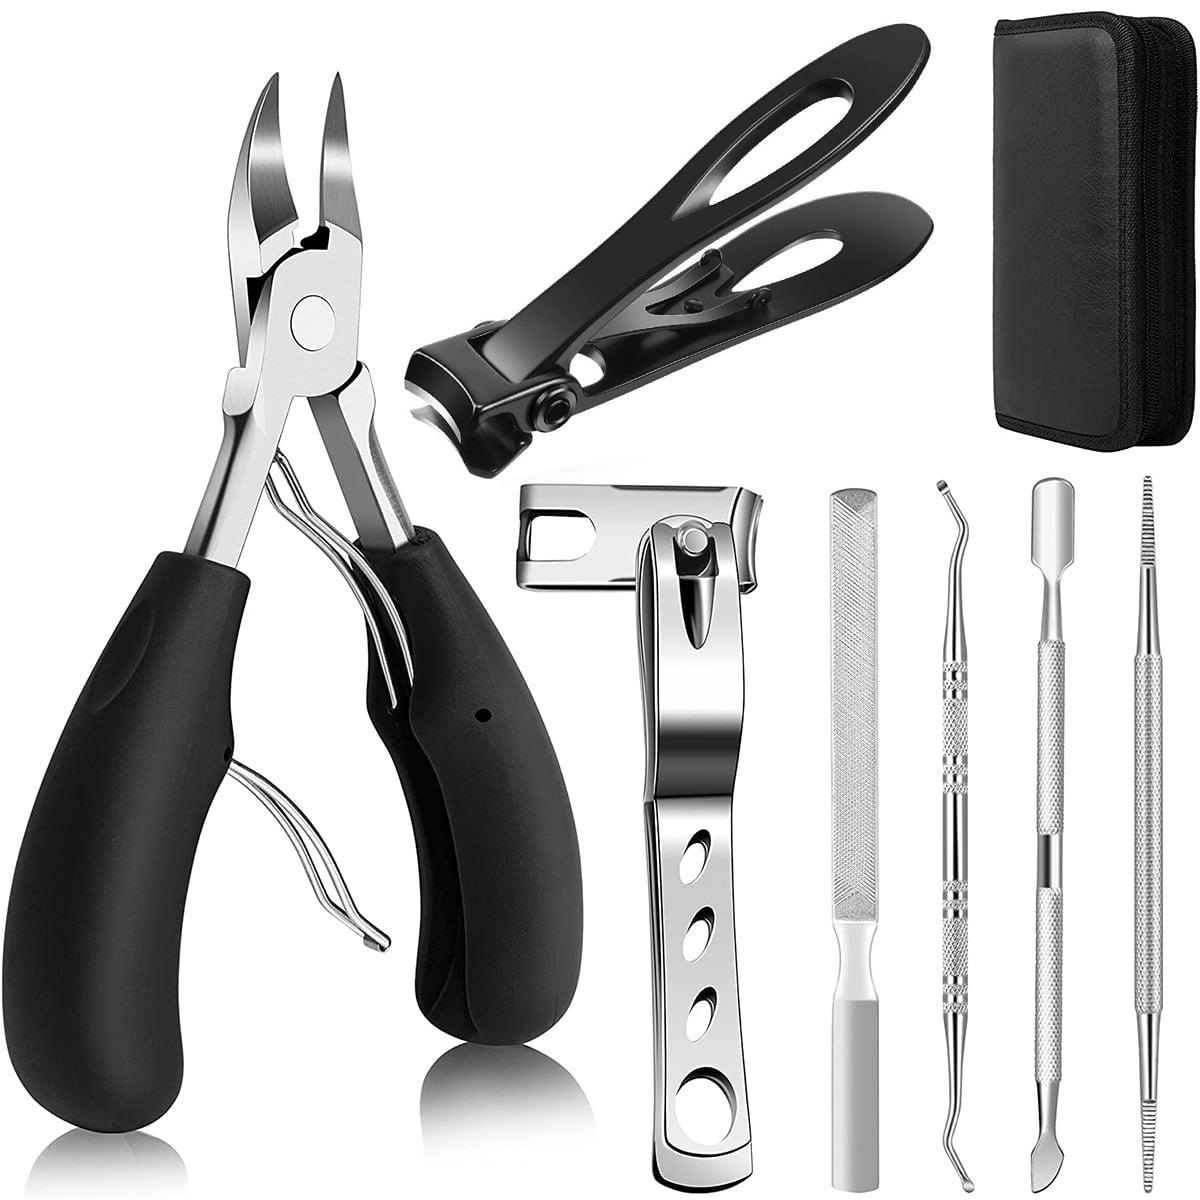 Gpoty 7 Pcs Nail Clippers Set,Ingrown Toenail Clippers Kit Stainless ...